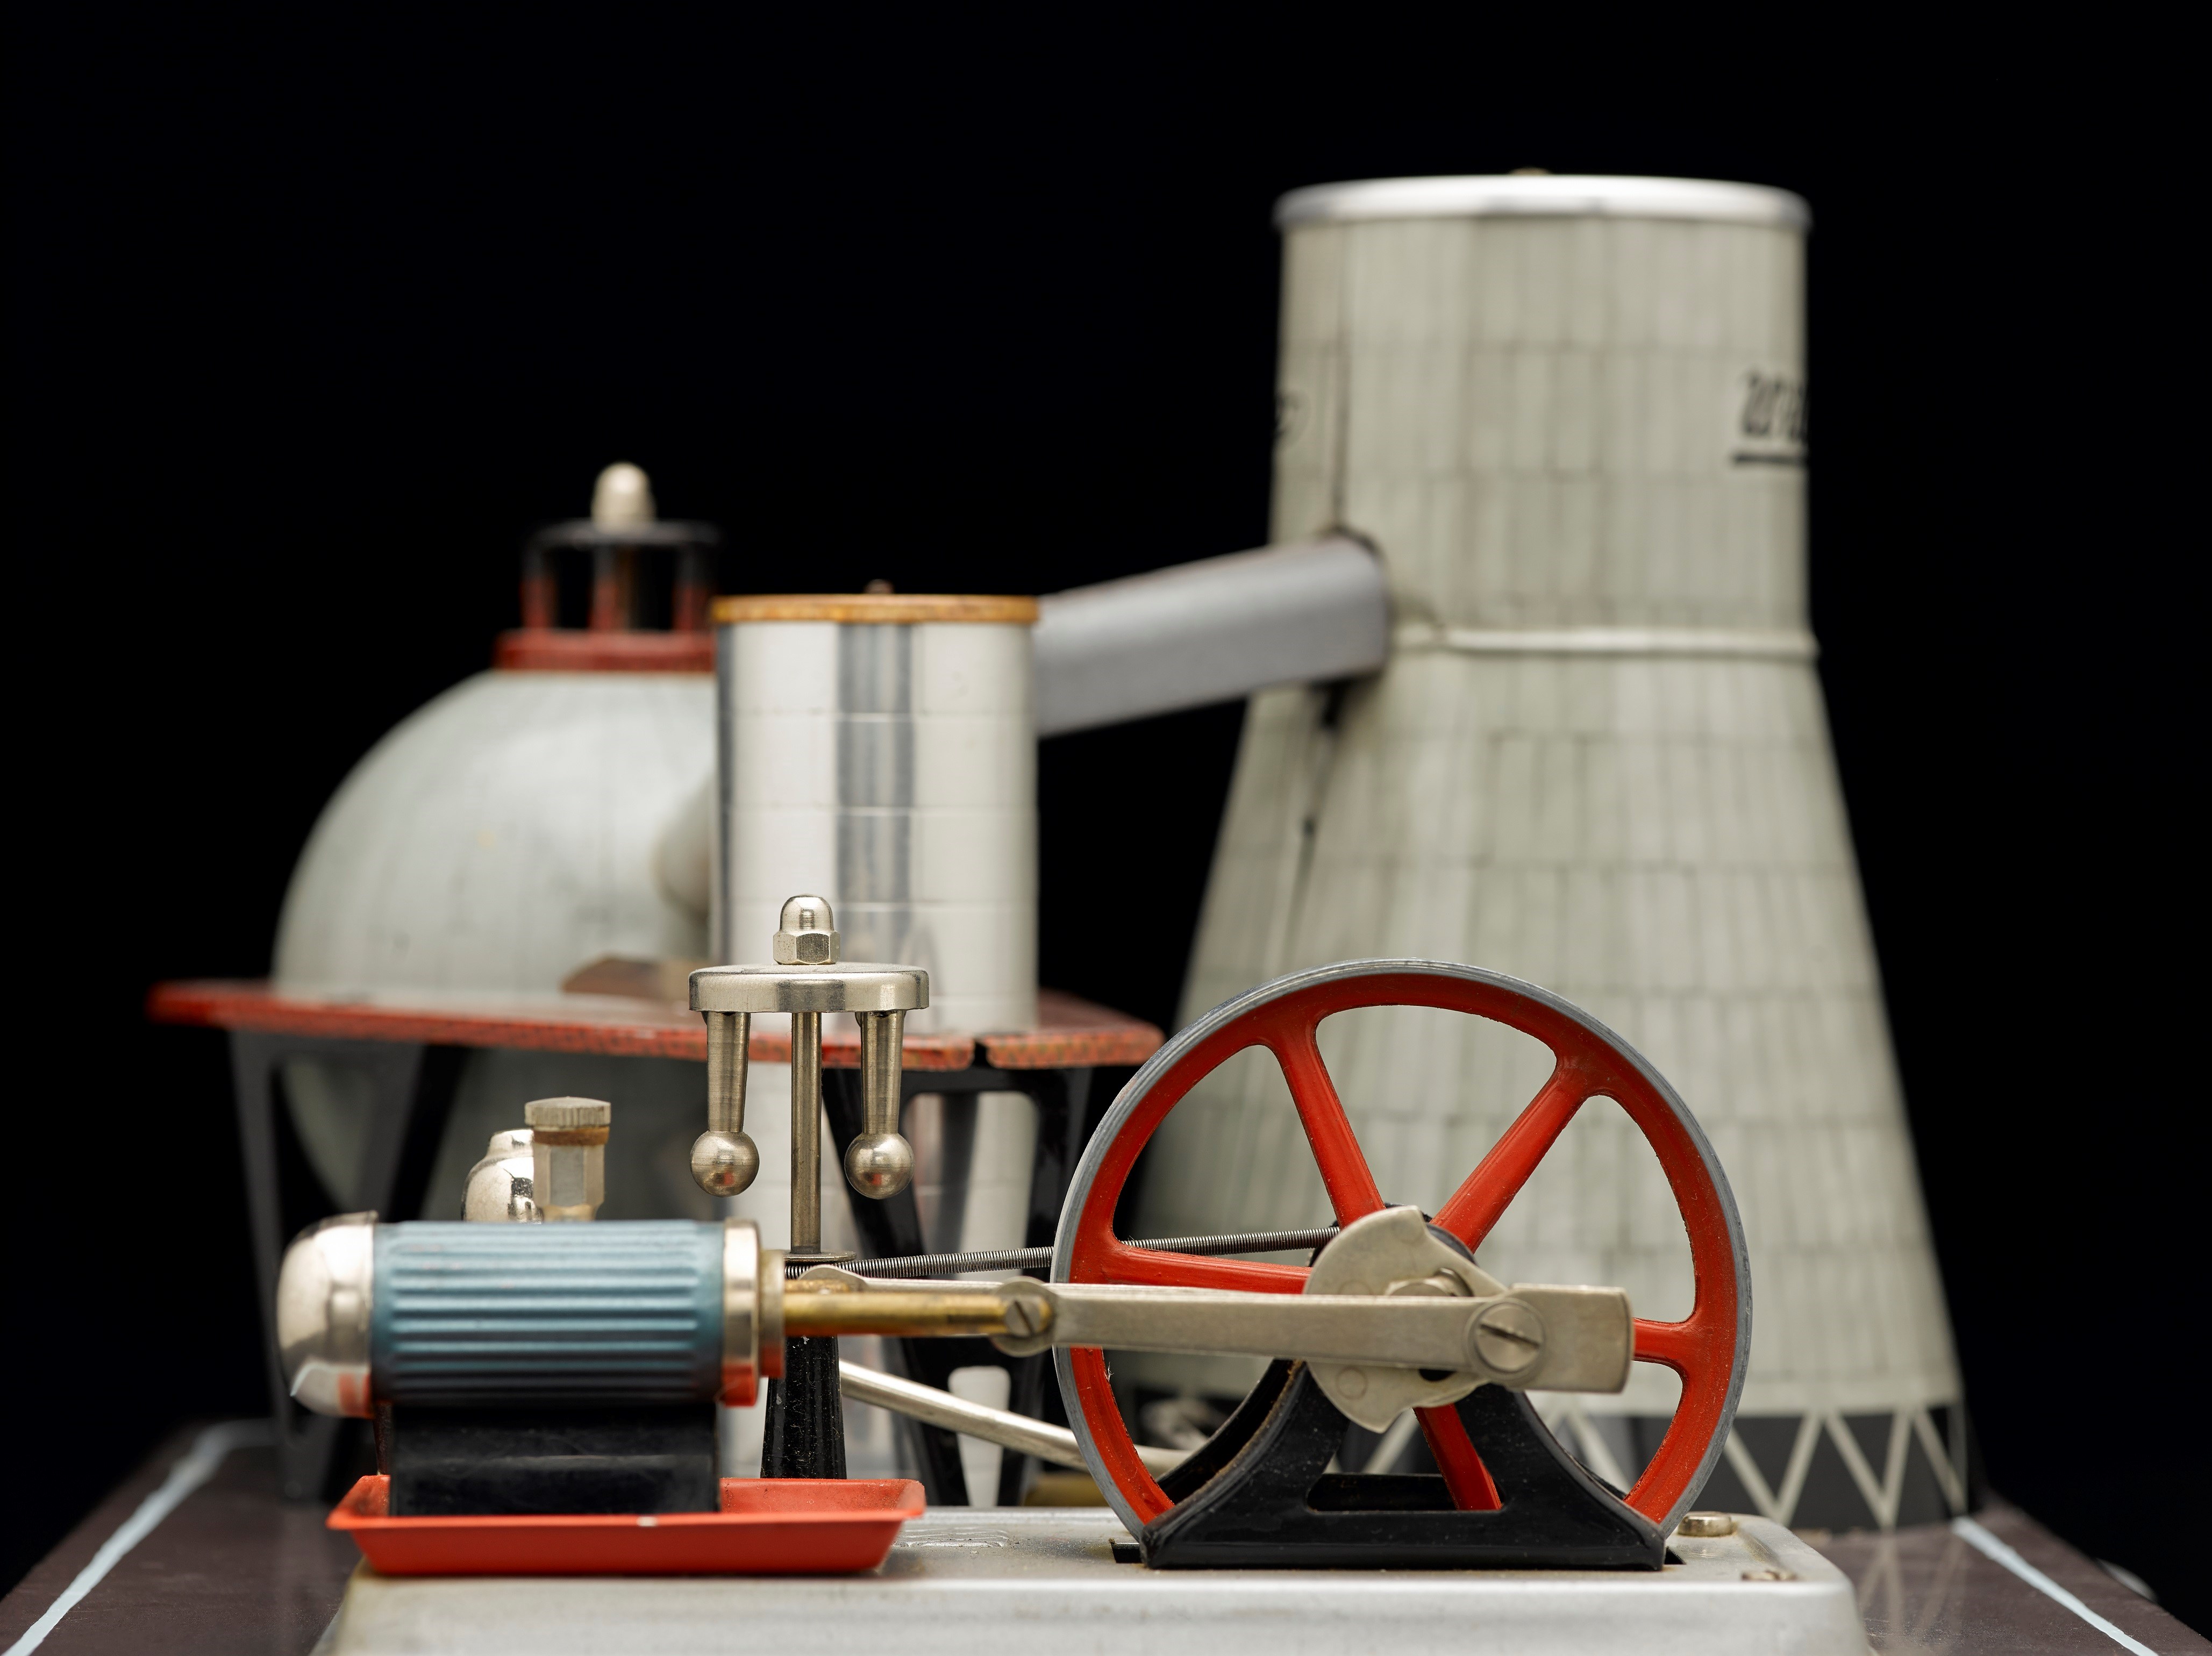 Model of a minature power station in red and metalics.